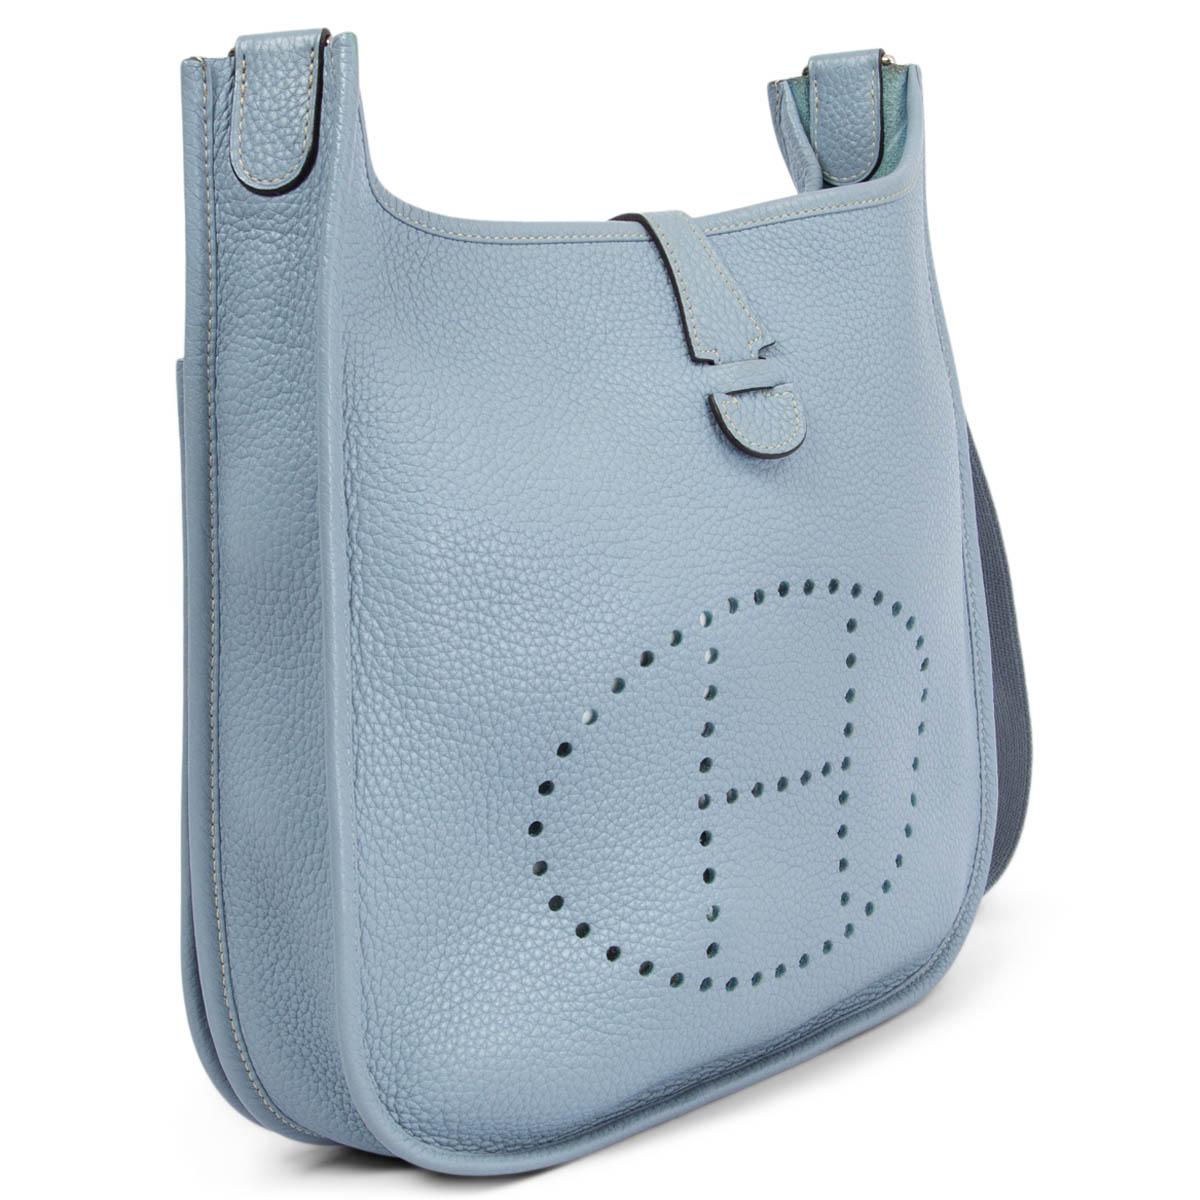 100% authentic Hermes Evelyne III 29 crossbody bag in Bleu Lin (baby blue) Taurillon Clemence leather with contrasting ivory stitching. Adjustable canvas shoulder strap. Open pocket on the back. Closes with a snap button on top. Unlined. Has been